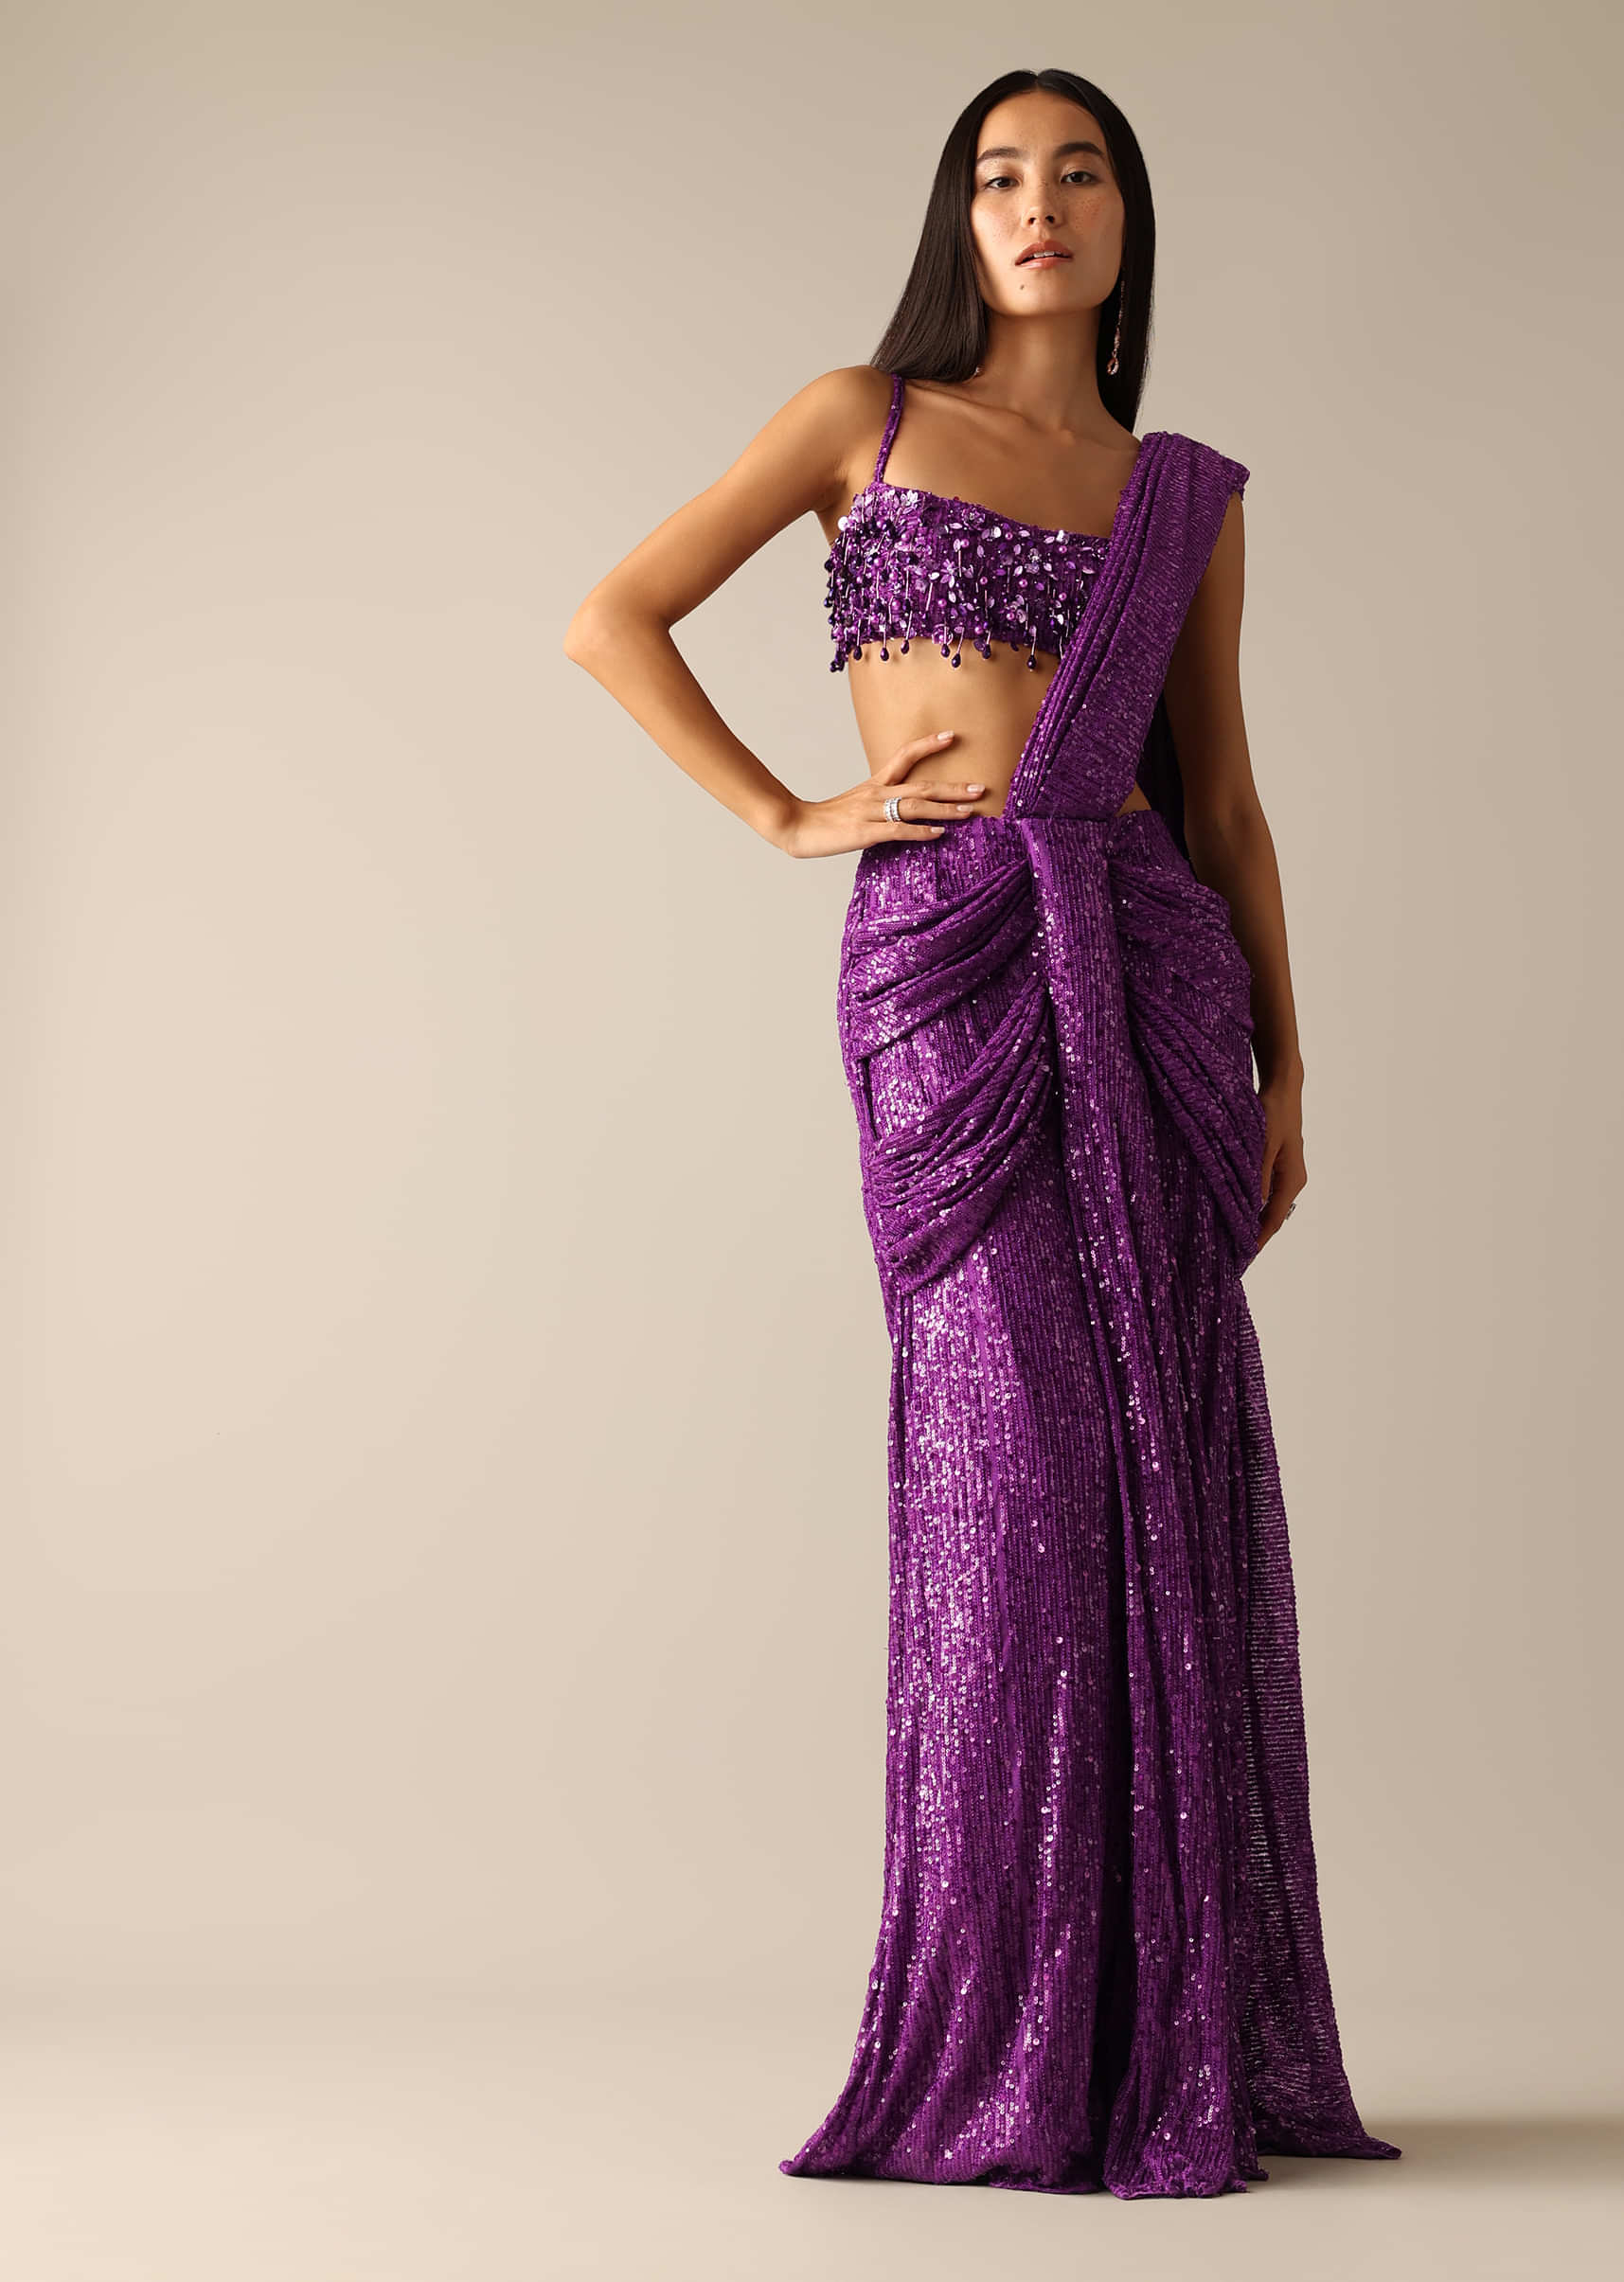 Lowest price  $12 - $24 - Violet Ready Pleated Saree and Violet Ready  Pleated Sari online shopping